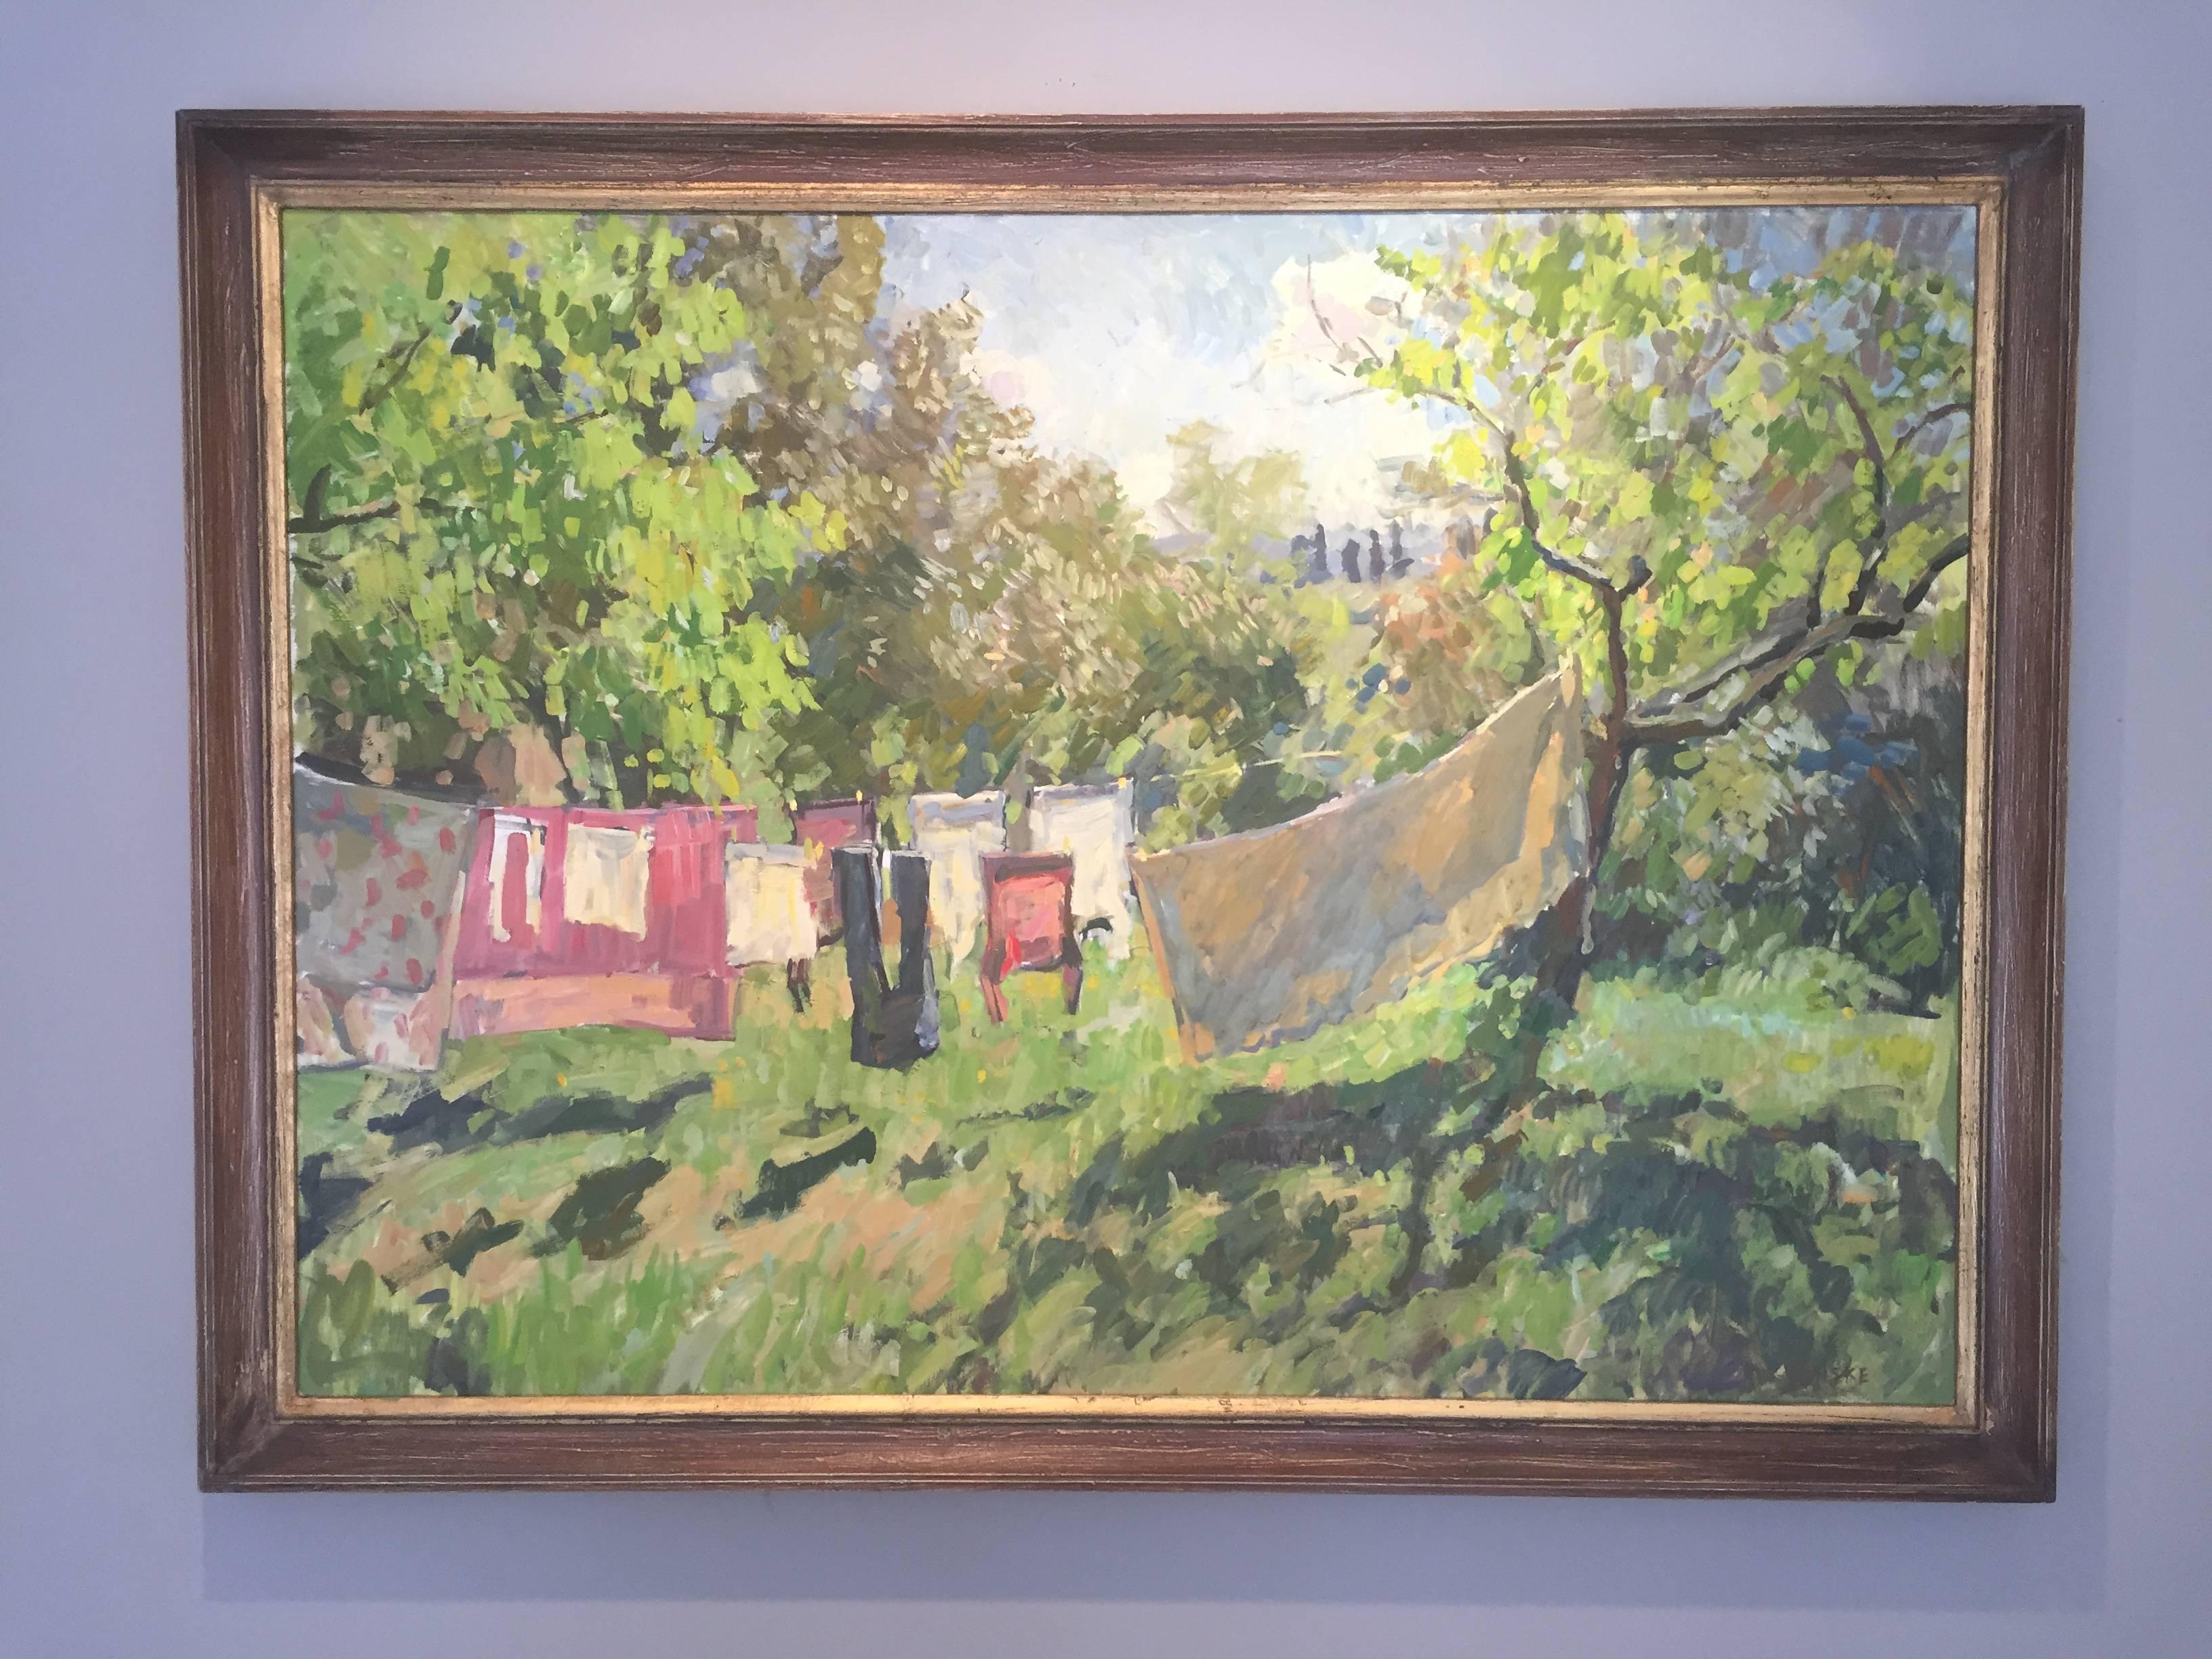 Laundry on the Line - Painting by Ben Fenske